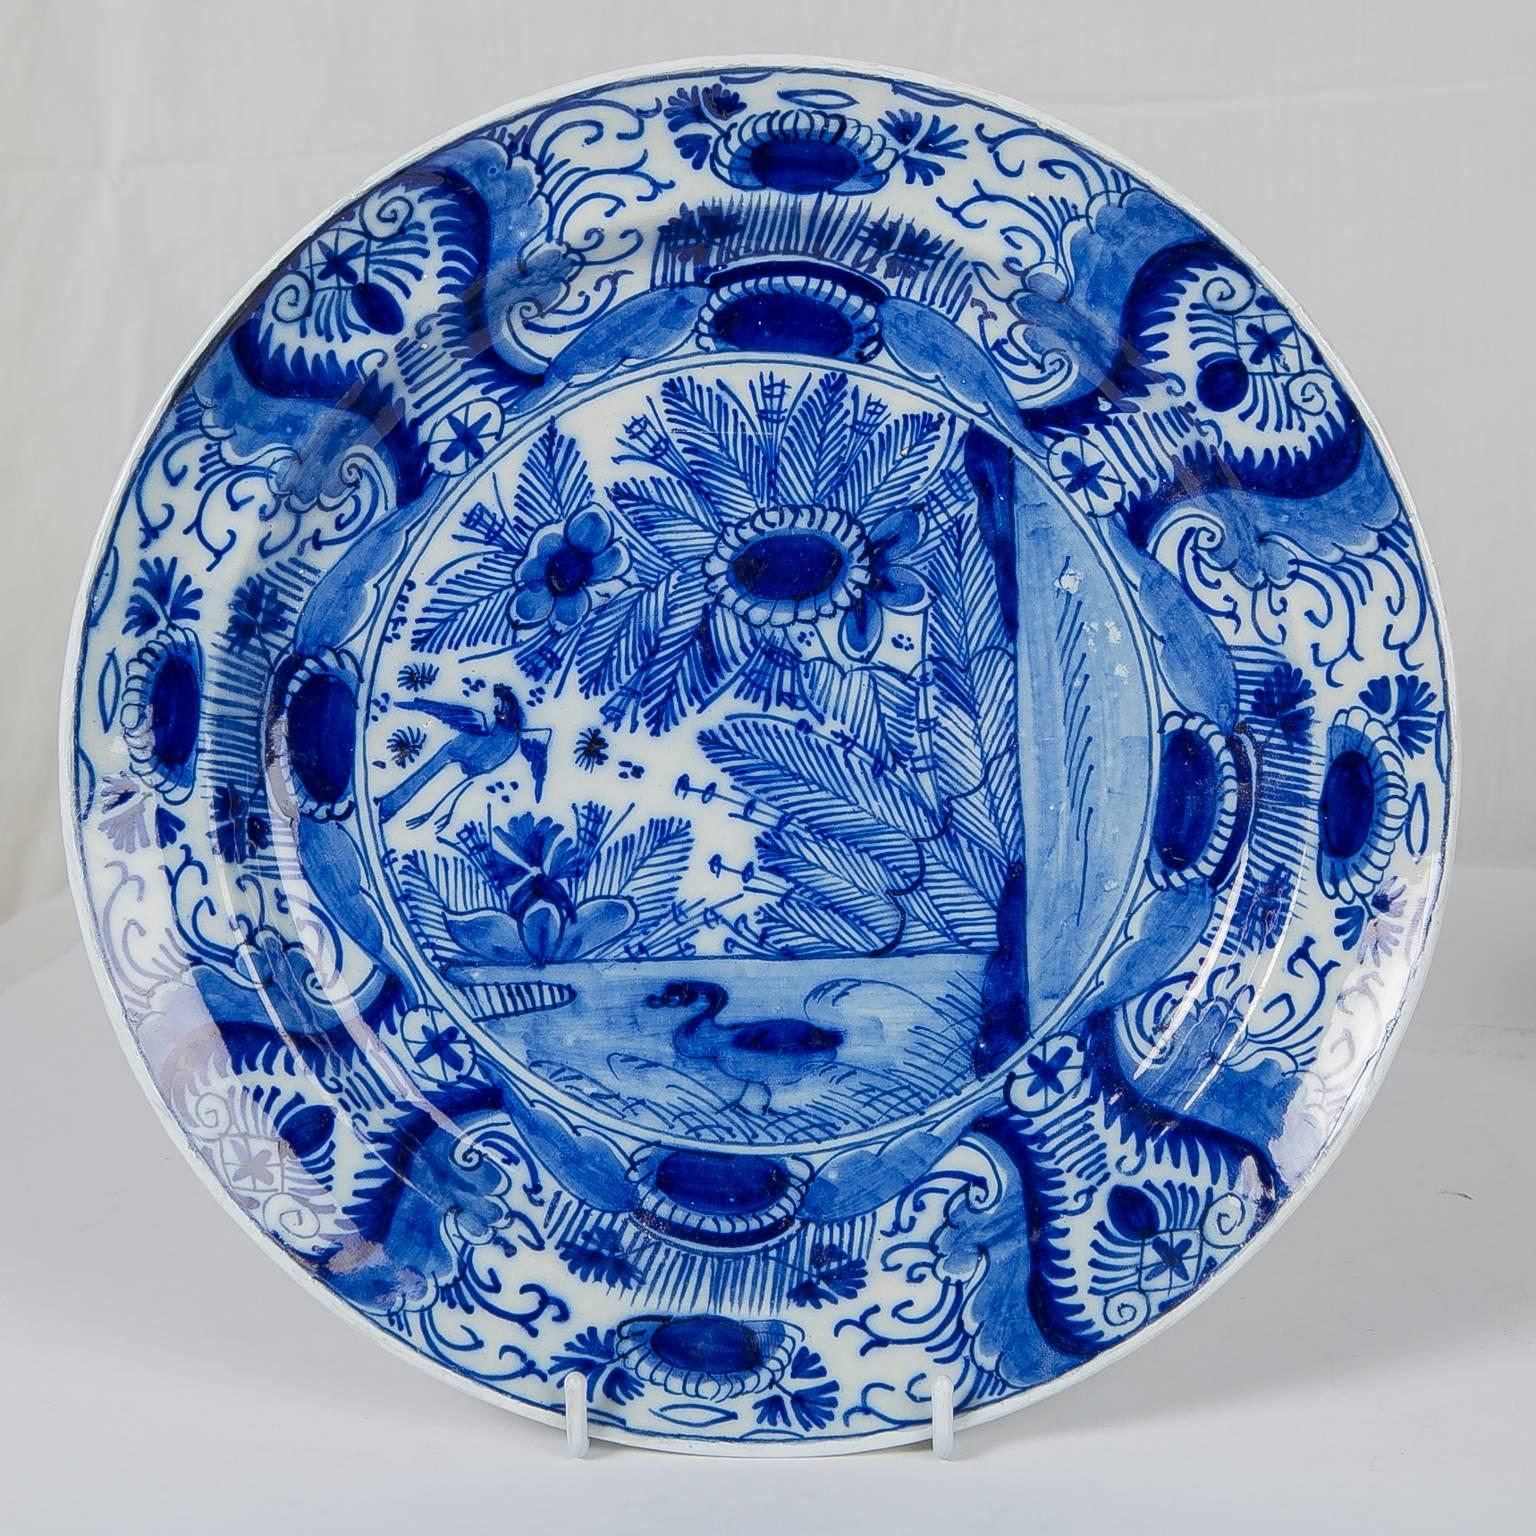 Chinoiserie Blue and White Dutch Delft Plate